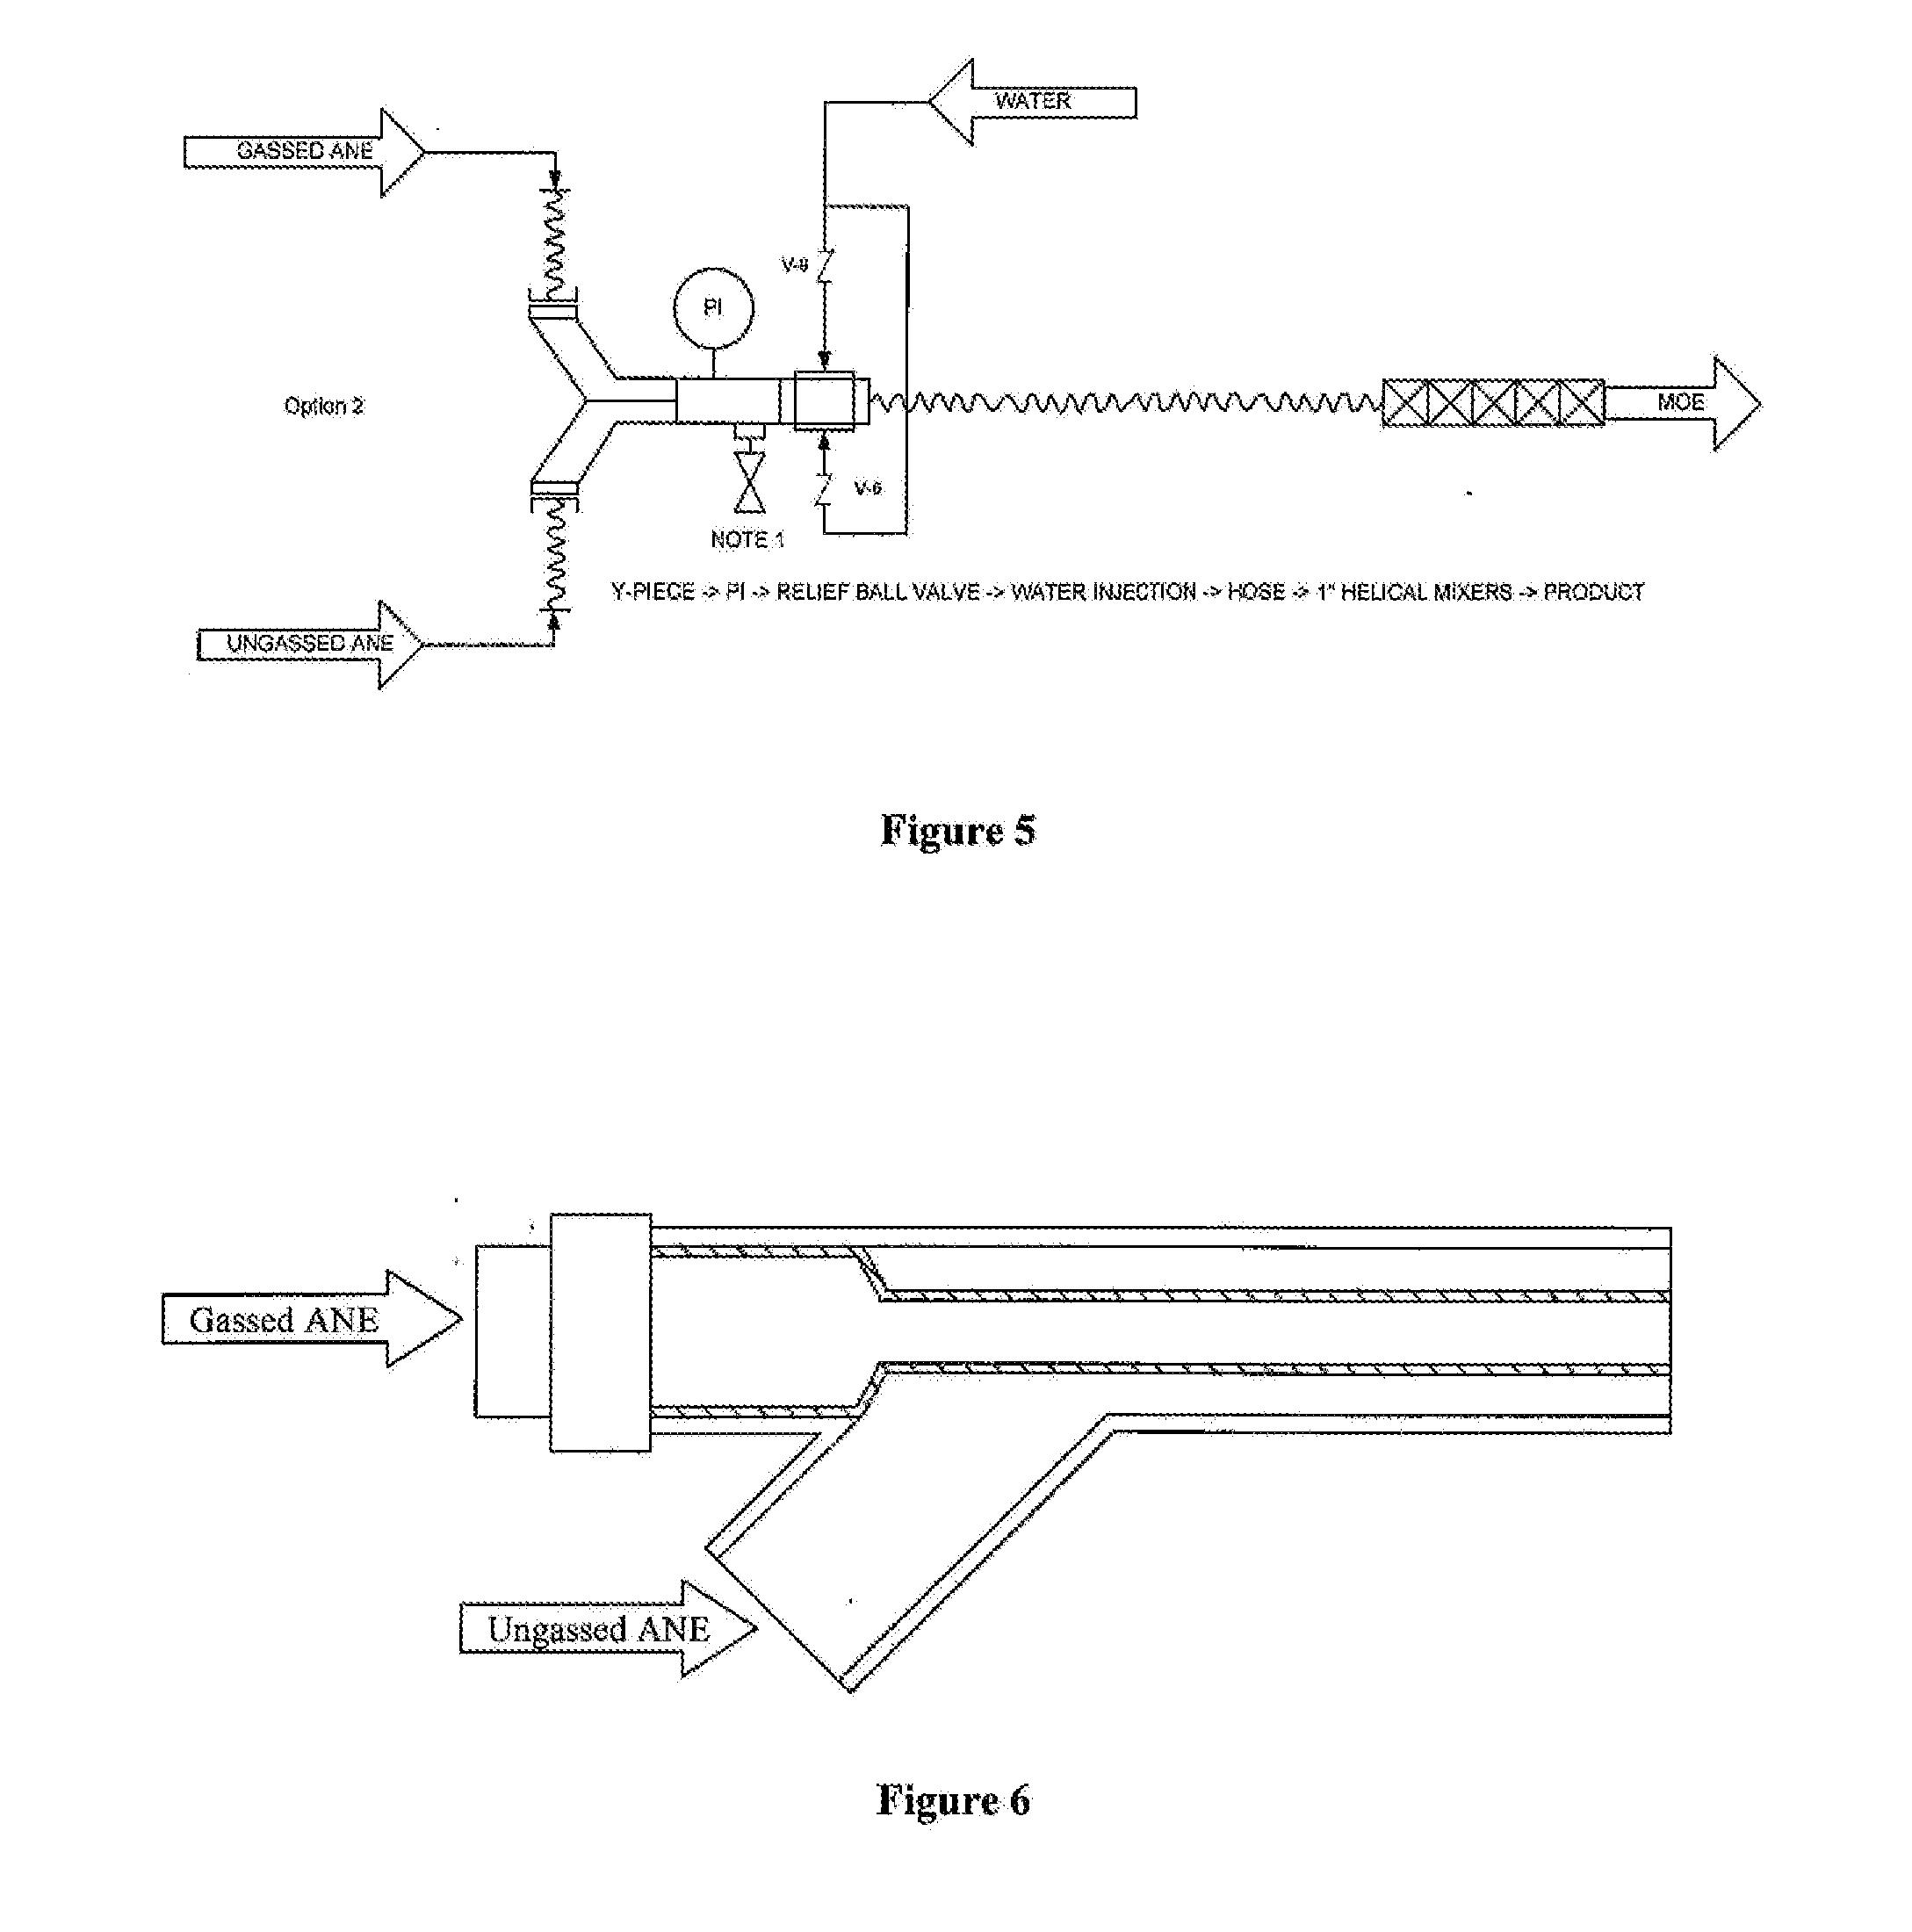 Explosive composition manufacturing and delivery platform, and blasting method